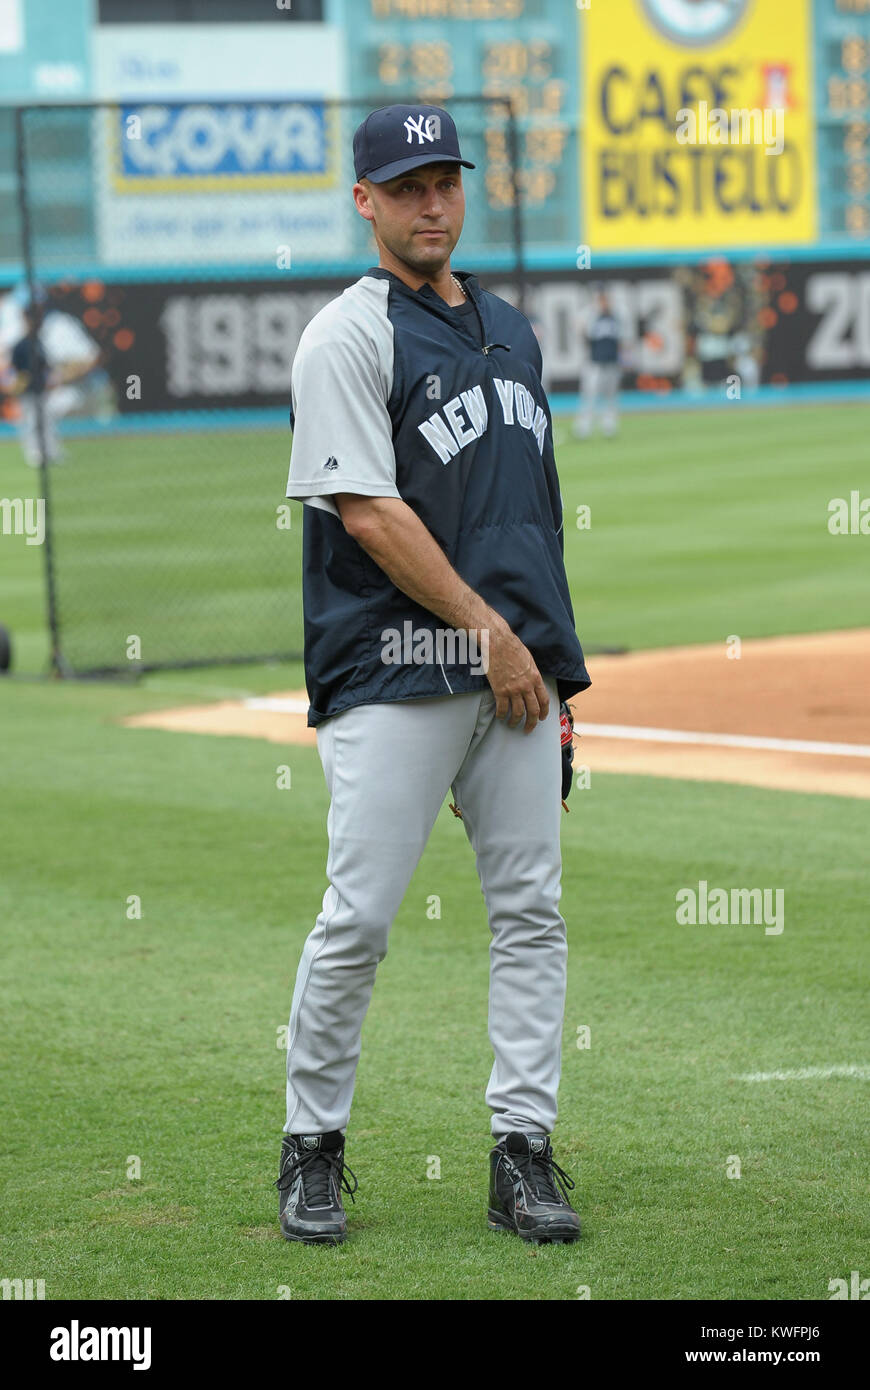 MIAMI, FL - JUNE 21: The New York Yankees warm up before their